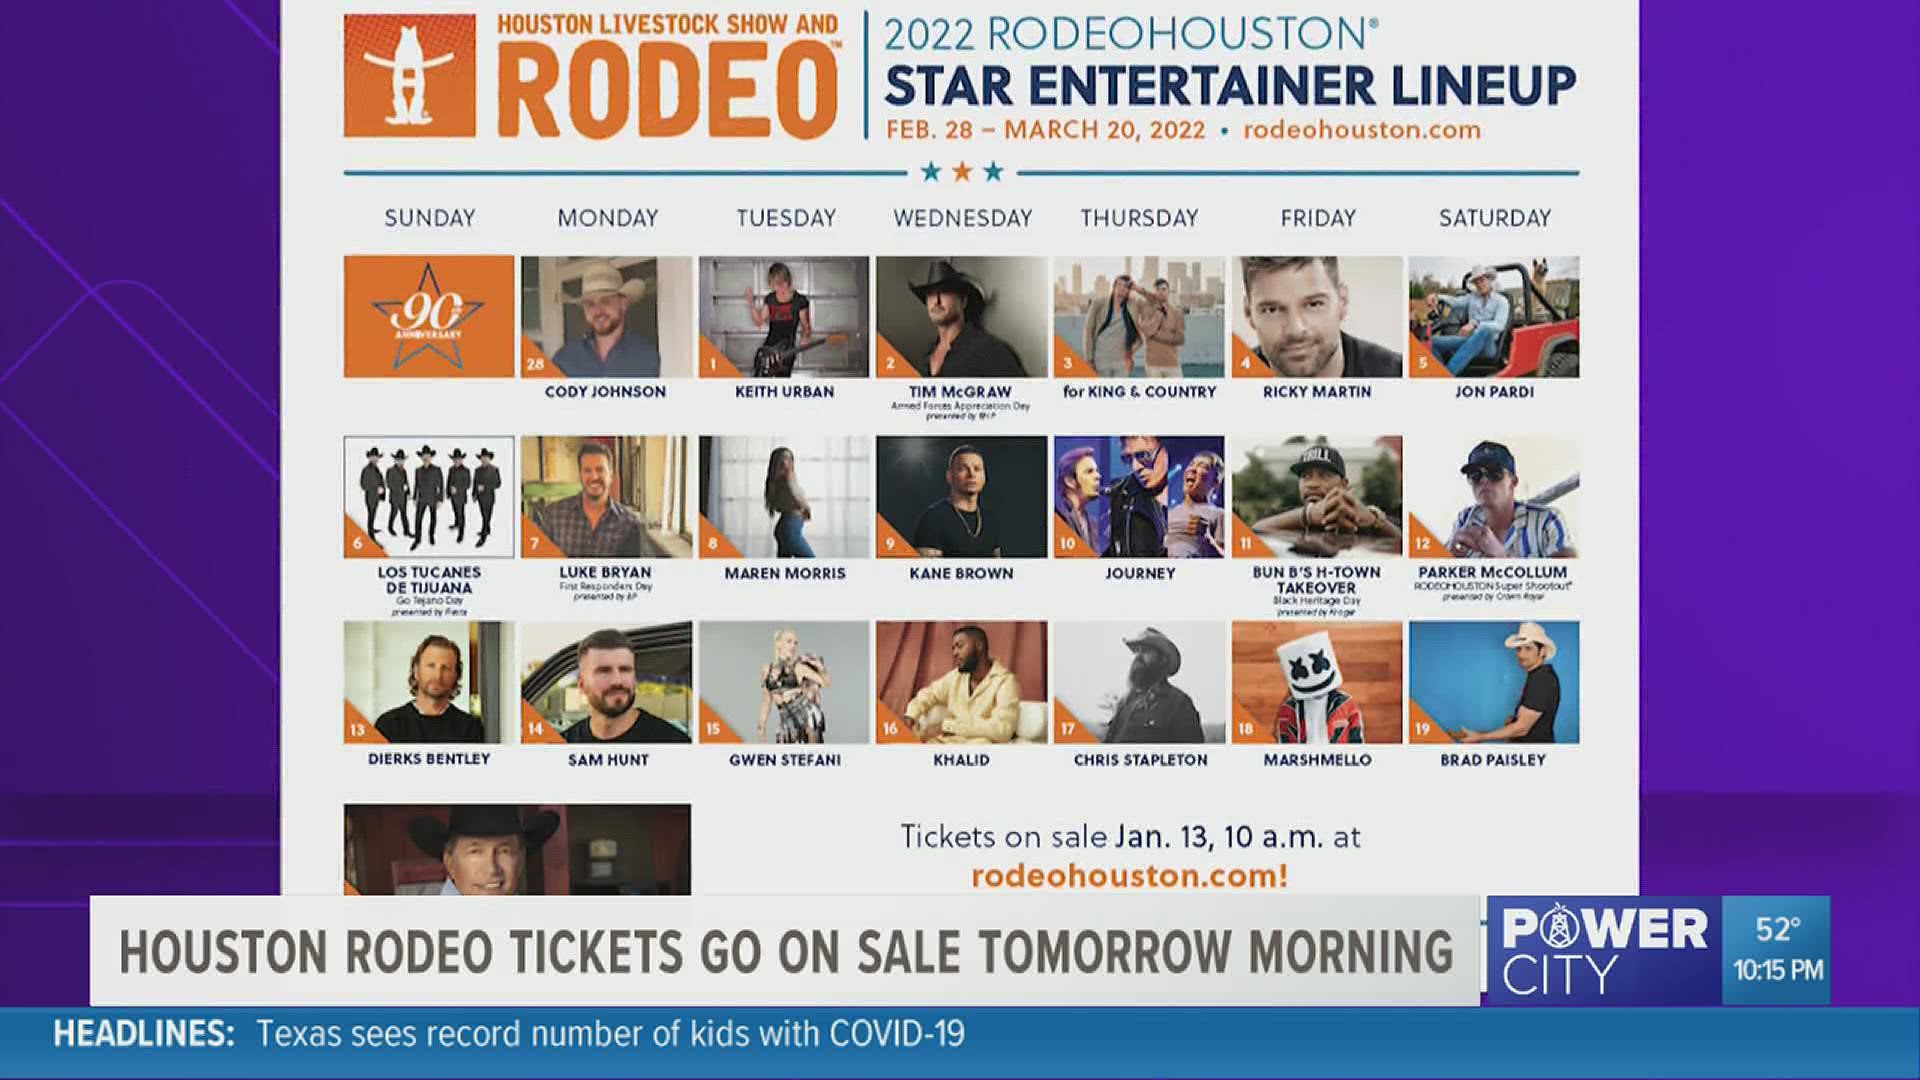 The Rodeo starts Feb. 28, 2022.